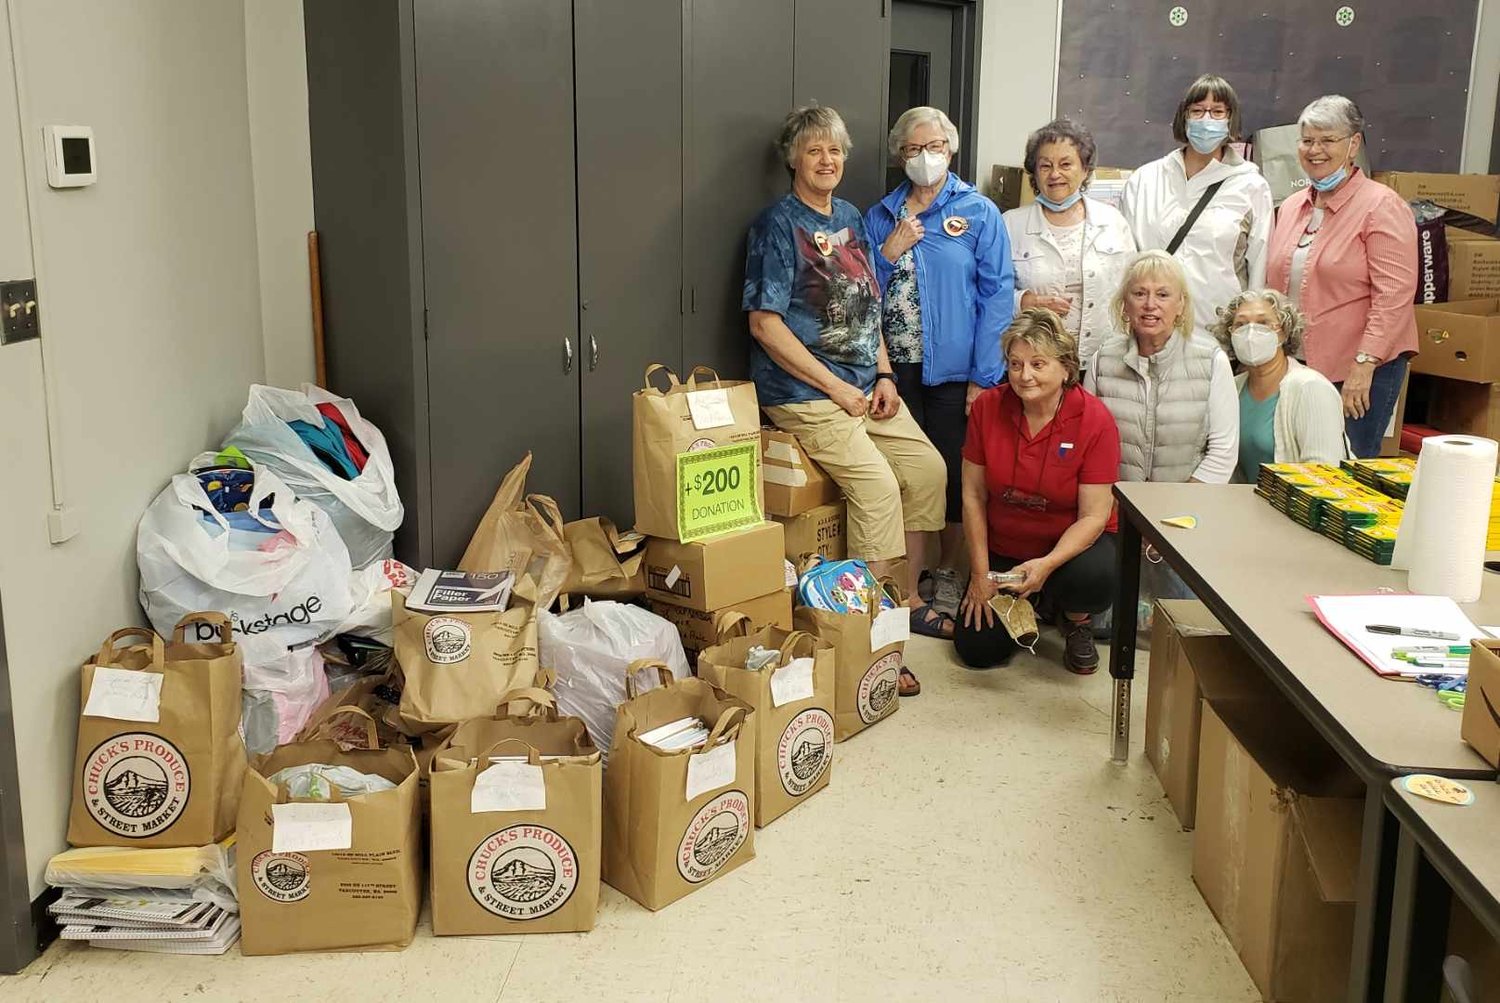 School supplies were donated by members of the General Federation of Women’s Clubs Battle Ground to the Battle Ground Education Foundation office on the Lewisville campus.